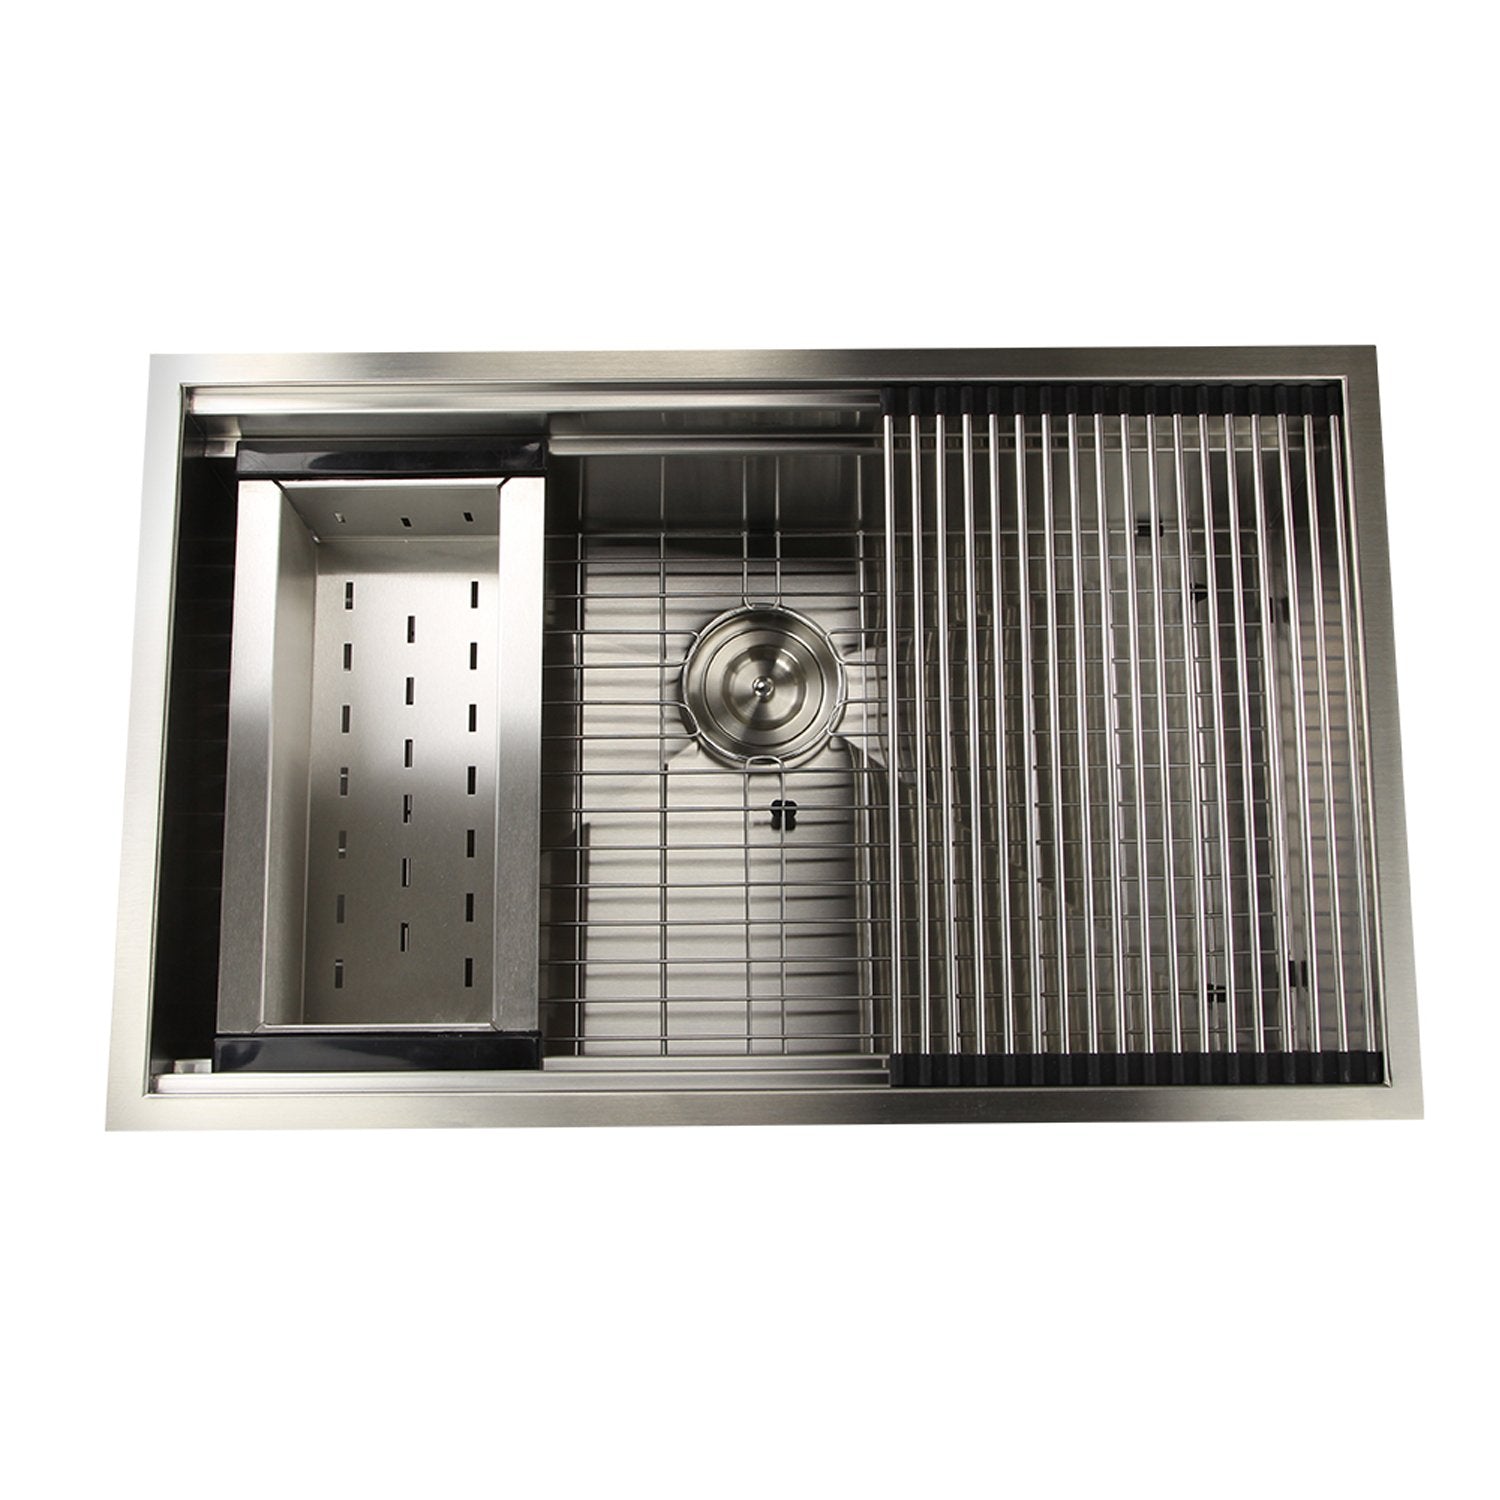 Nantucket Sinks ZR-PS-3220-16 - 32" Pro Series Workstation Undermount Stainless Steel Kitchen Sink, With Included Rolling Mat, Grid, Colander, and Drain.